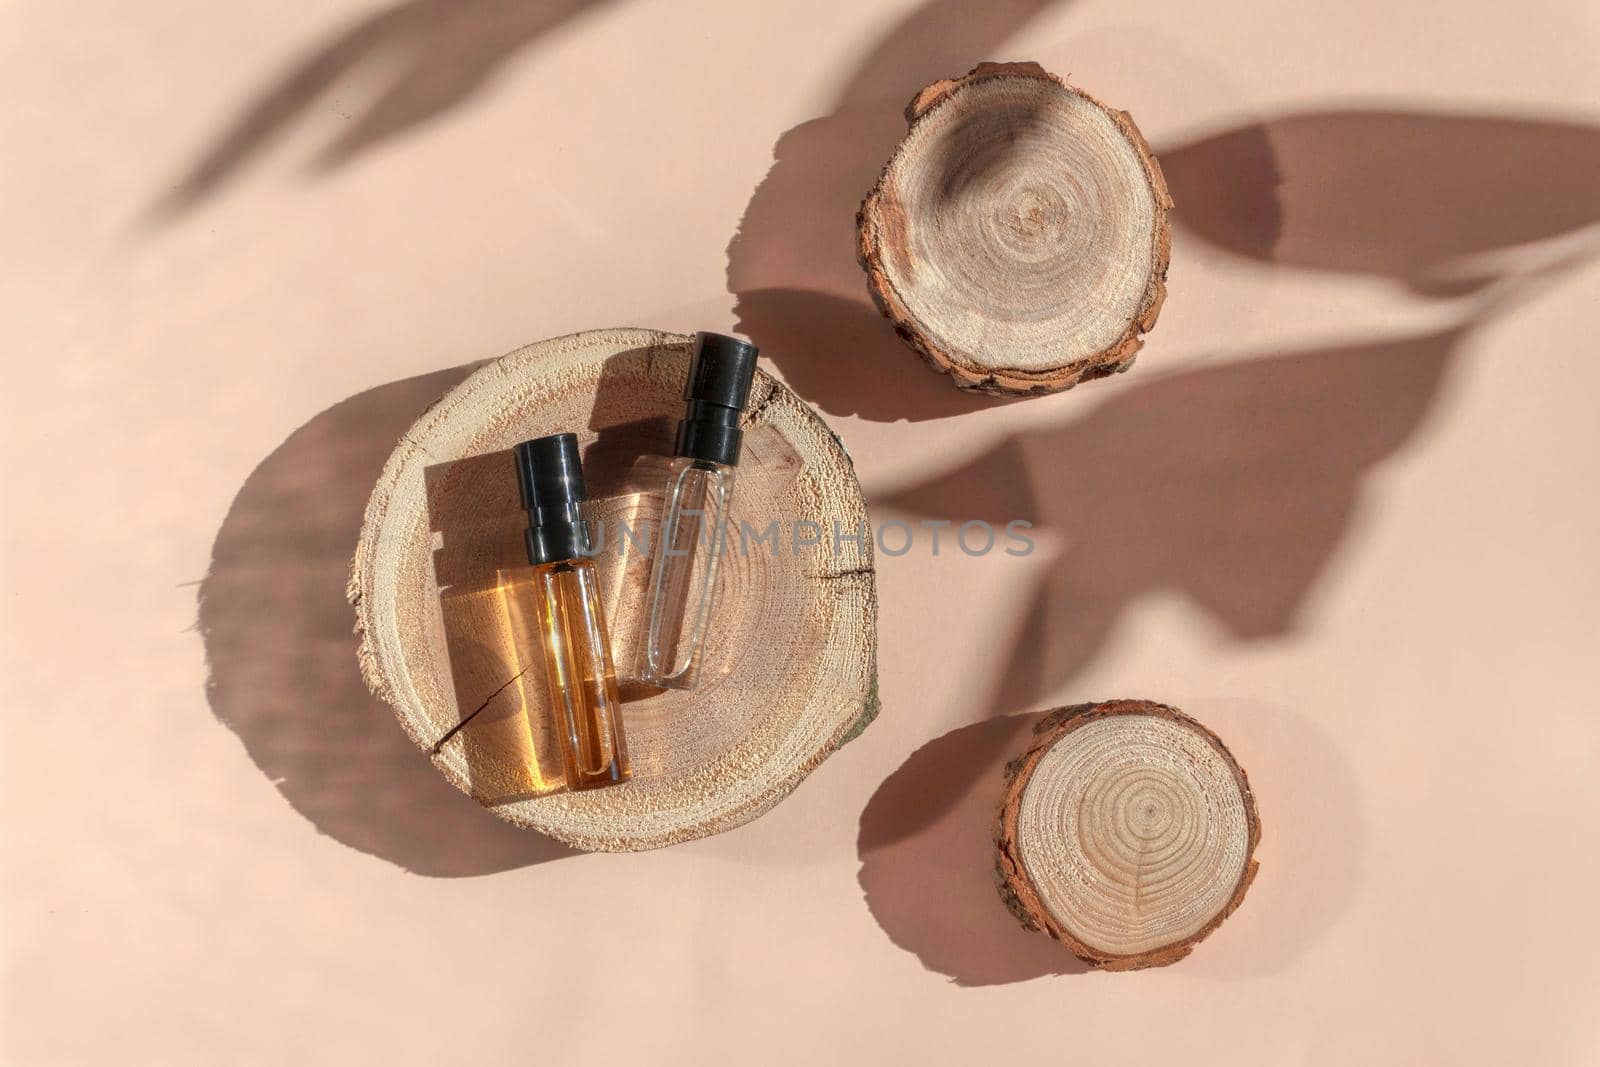 Perfume samples with yellow and transparent liquid on woodcut lying on beige background with shadows above. Luxury and natural cosmetic presentation. Testers in sunlight. Shades and lights. Top view